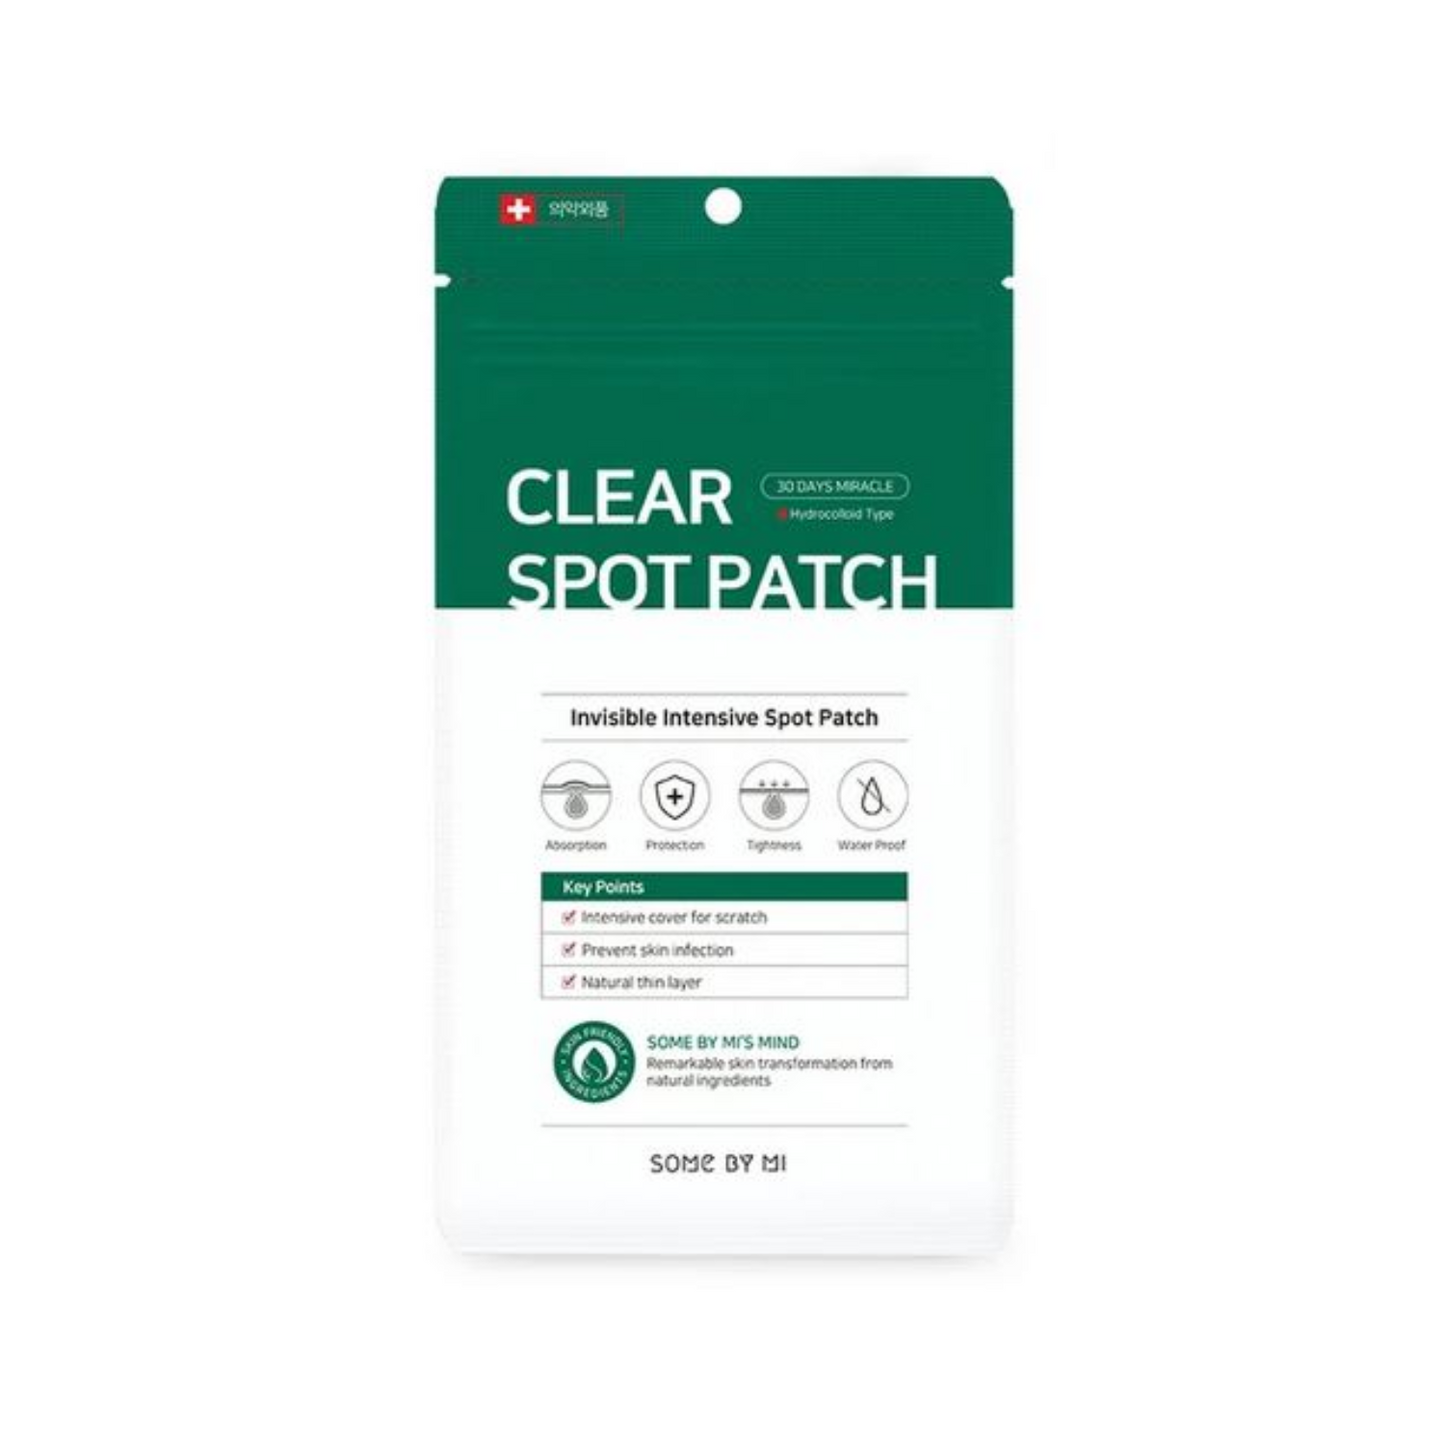 SOMEBYMI 30 days Miracle Clear Spot Patches